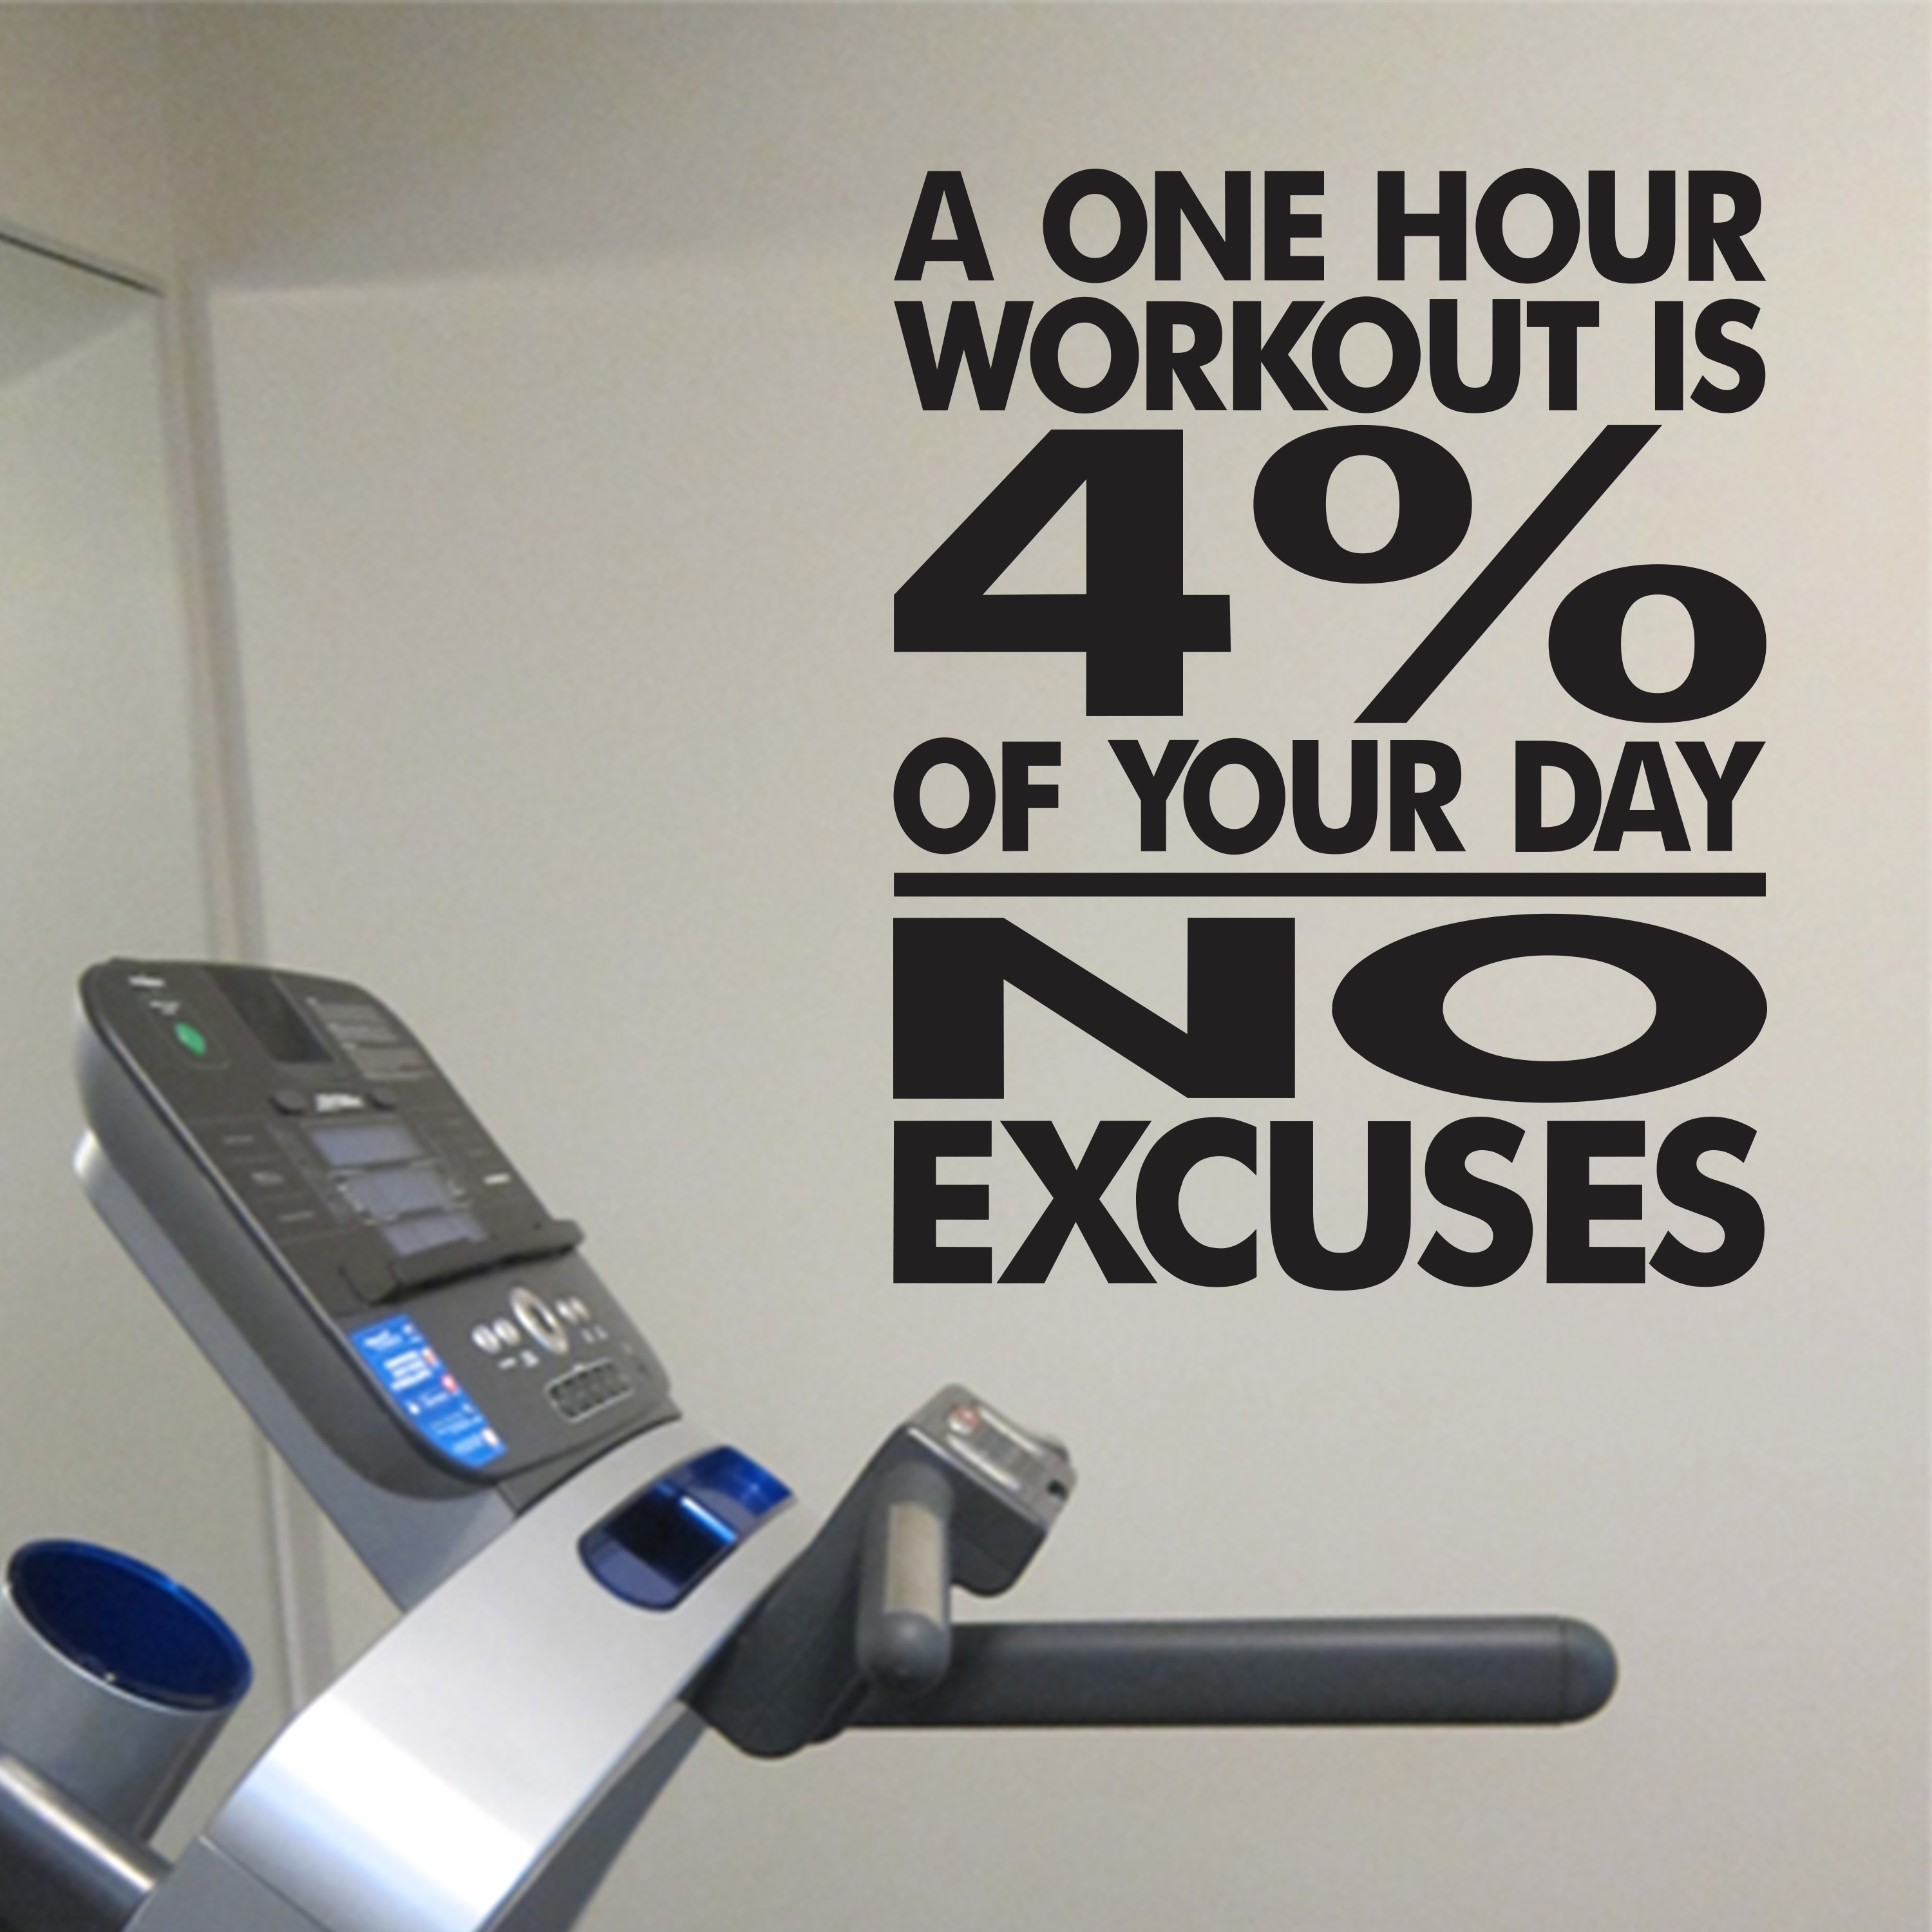 Your Excuses Workout Motivation Quotes Vinyl Art Sticker Home Gym Wall Decals